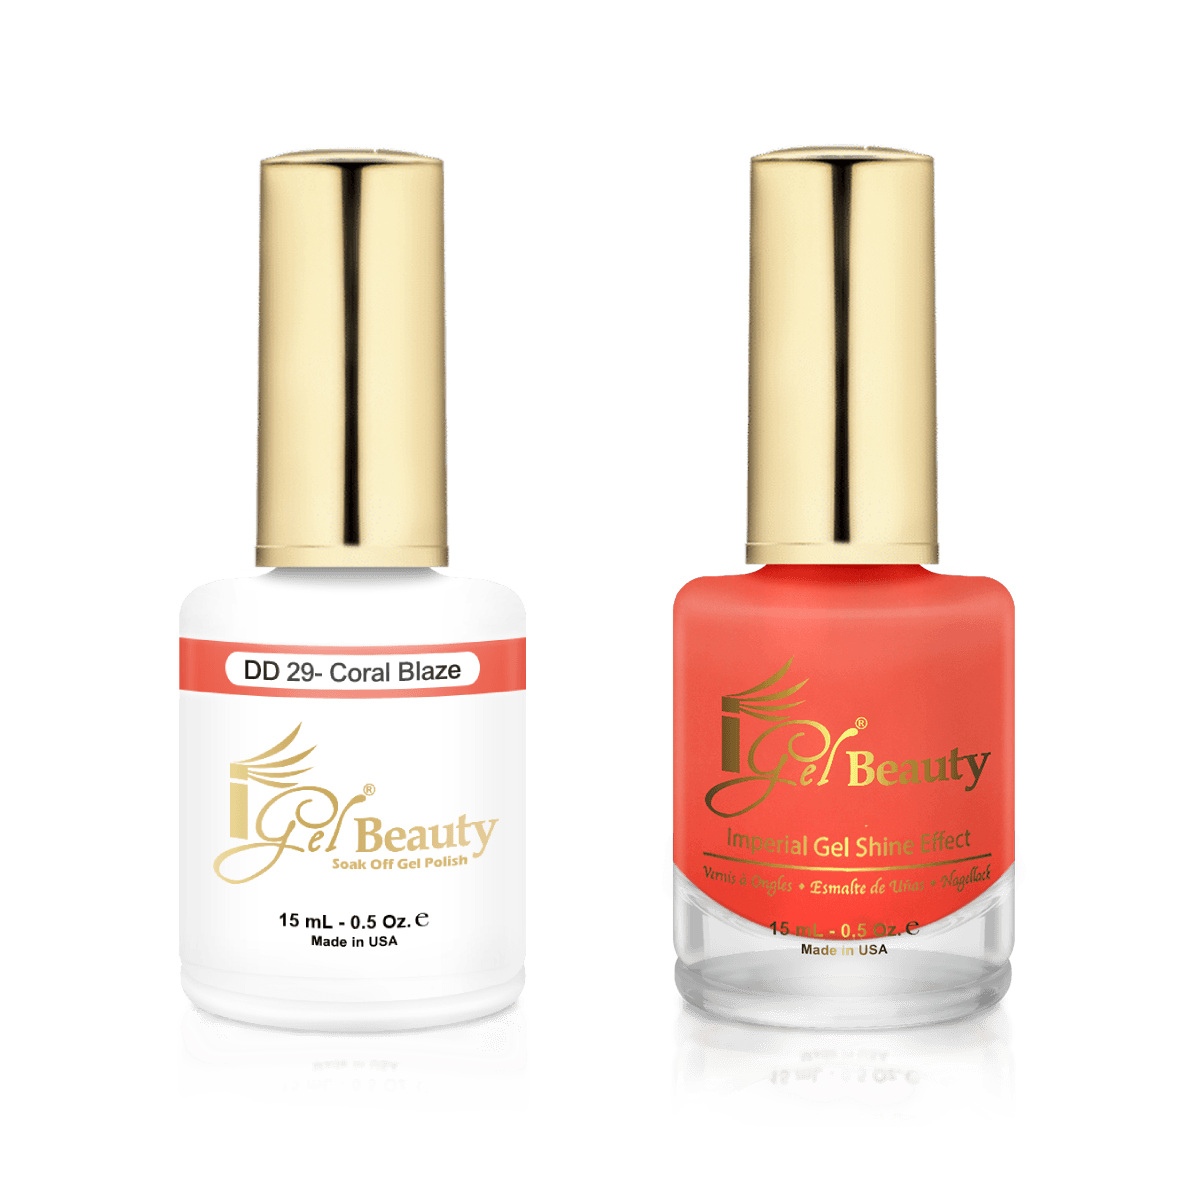 IGel Duo Gel Polish + Matching Nail Lacquer DD 29 CORAL BLAZE